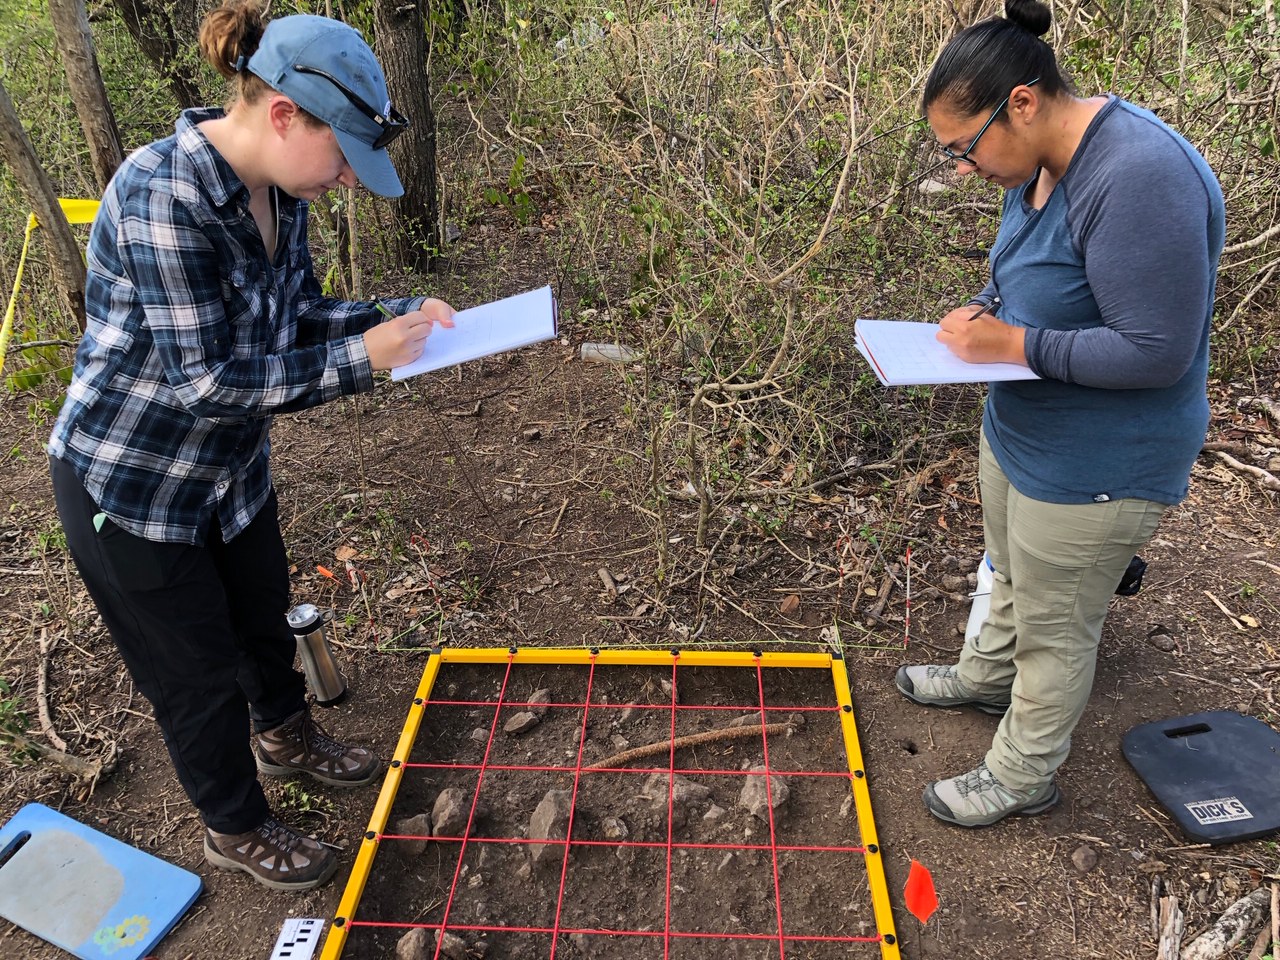 Two students working over a grid on the ground